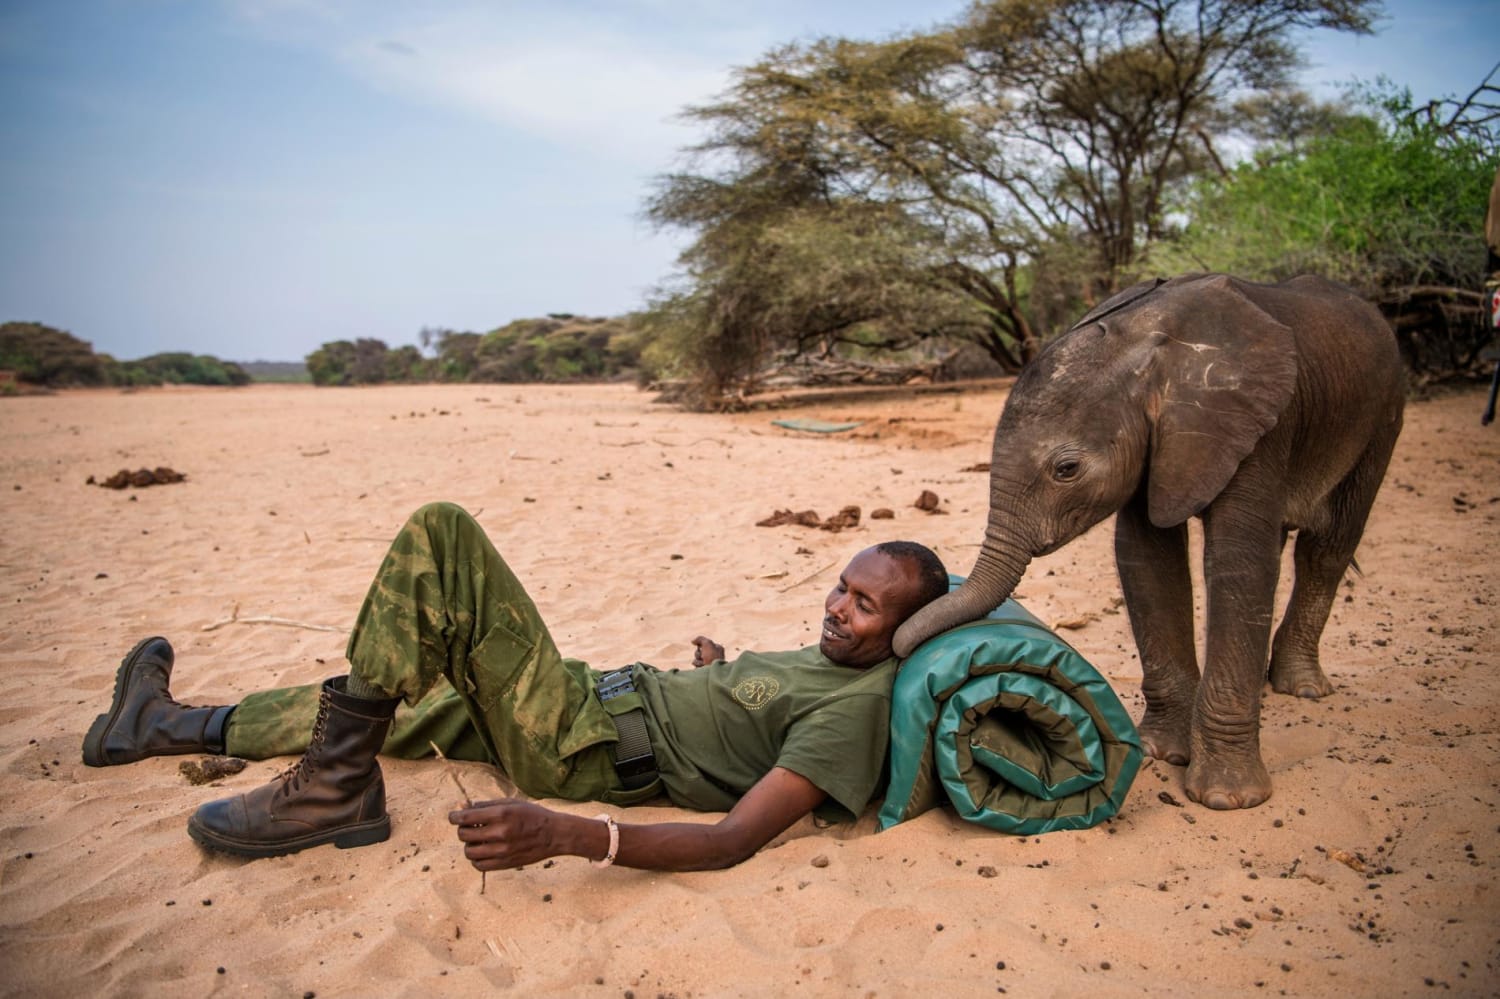 Warriors Who Once Feared Elephants Now Protect Them